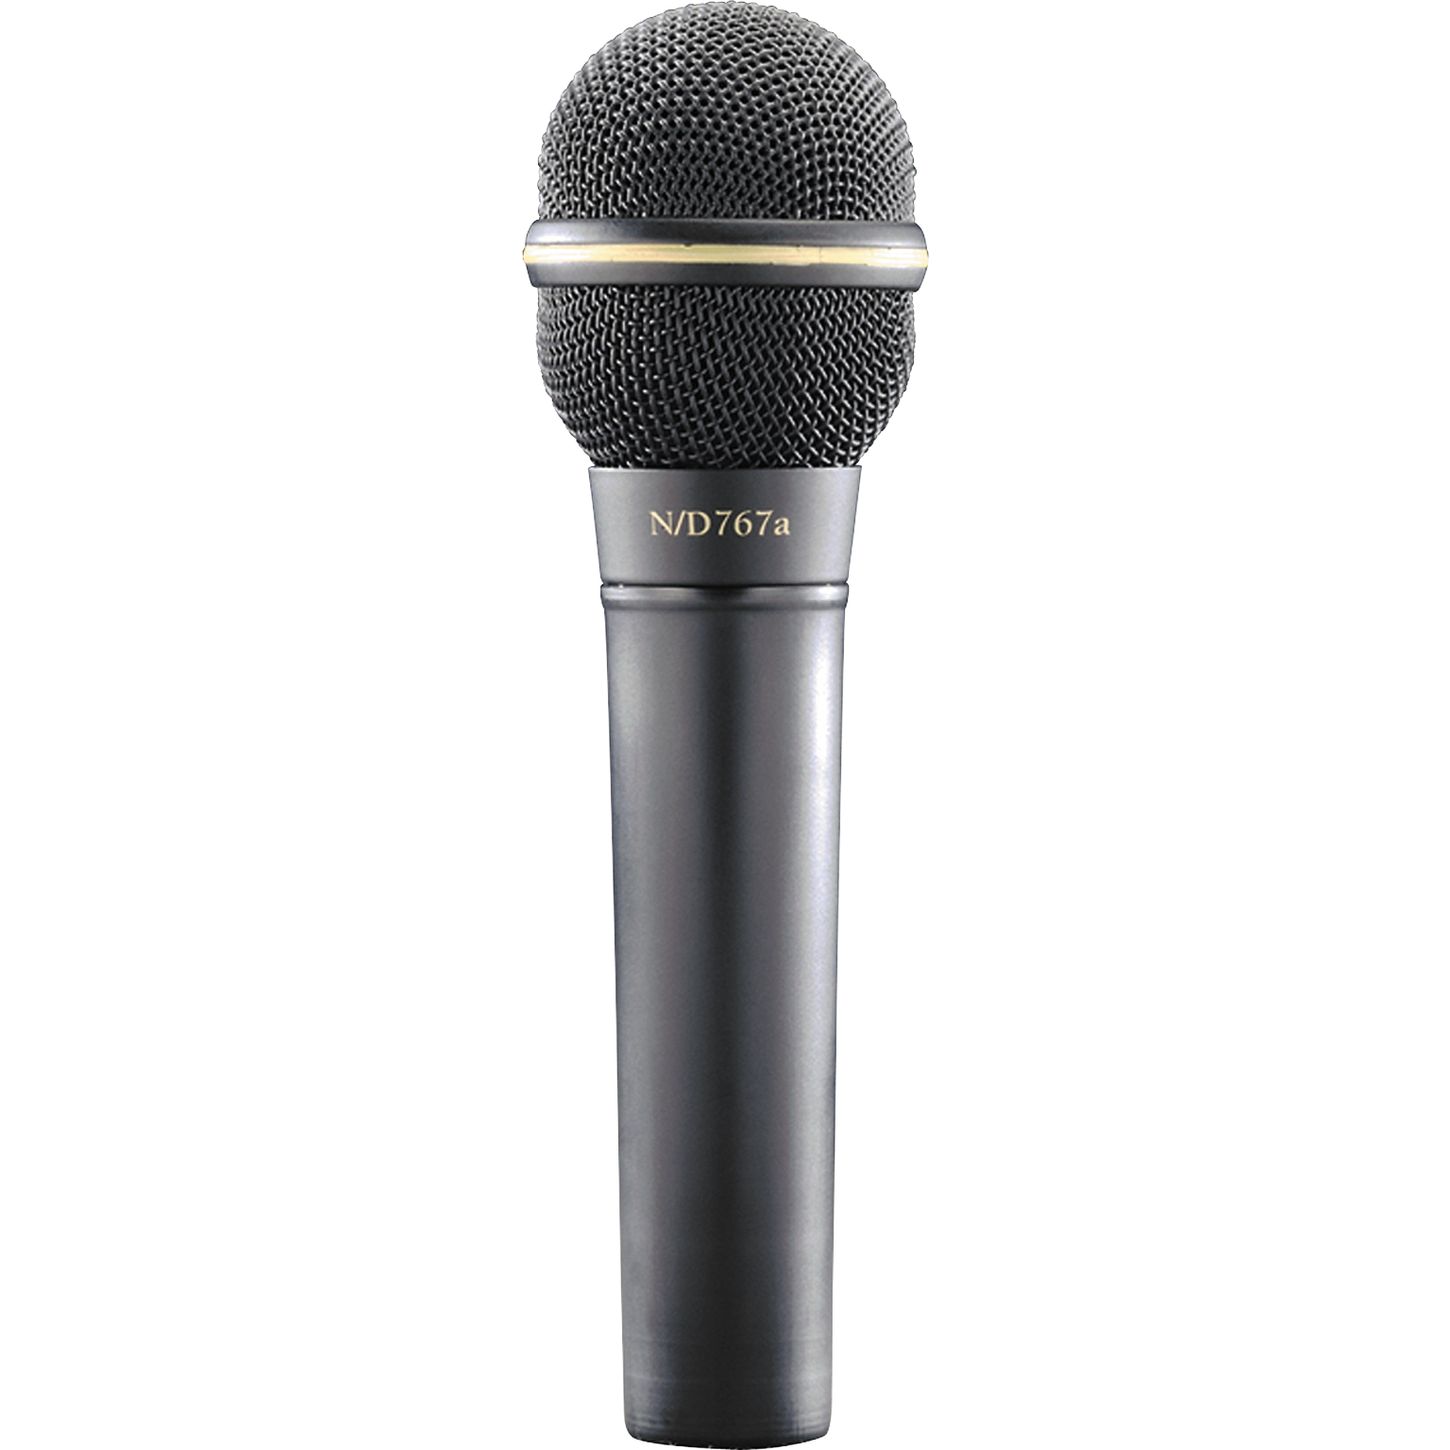 Electro-Voice N/D767a Dynamic Supercardioid Vocal Microphone | Musician